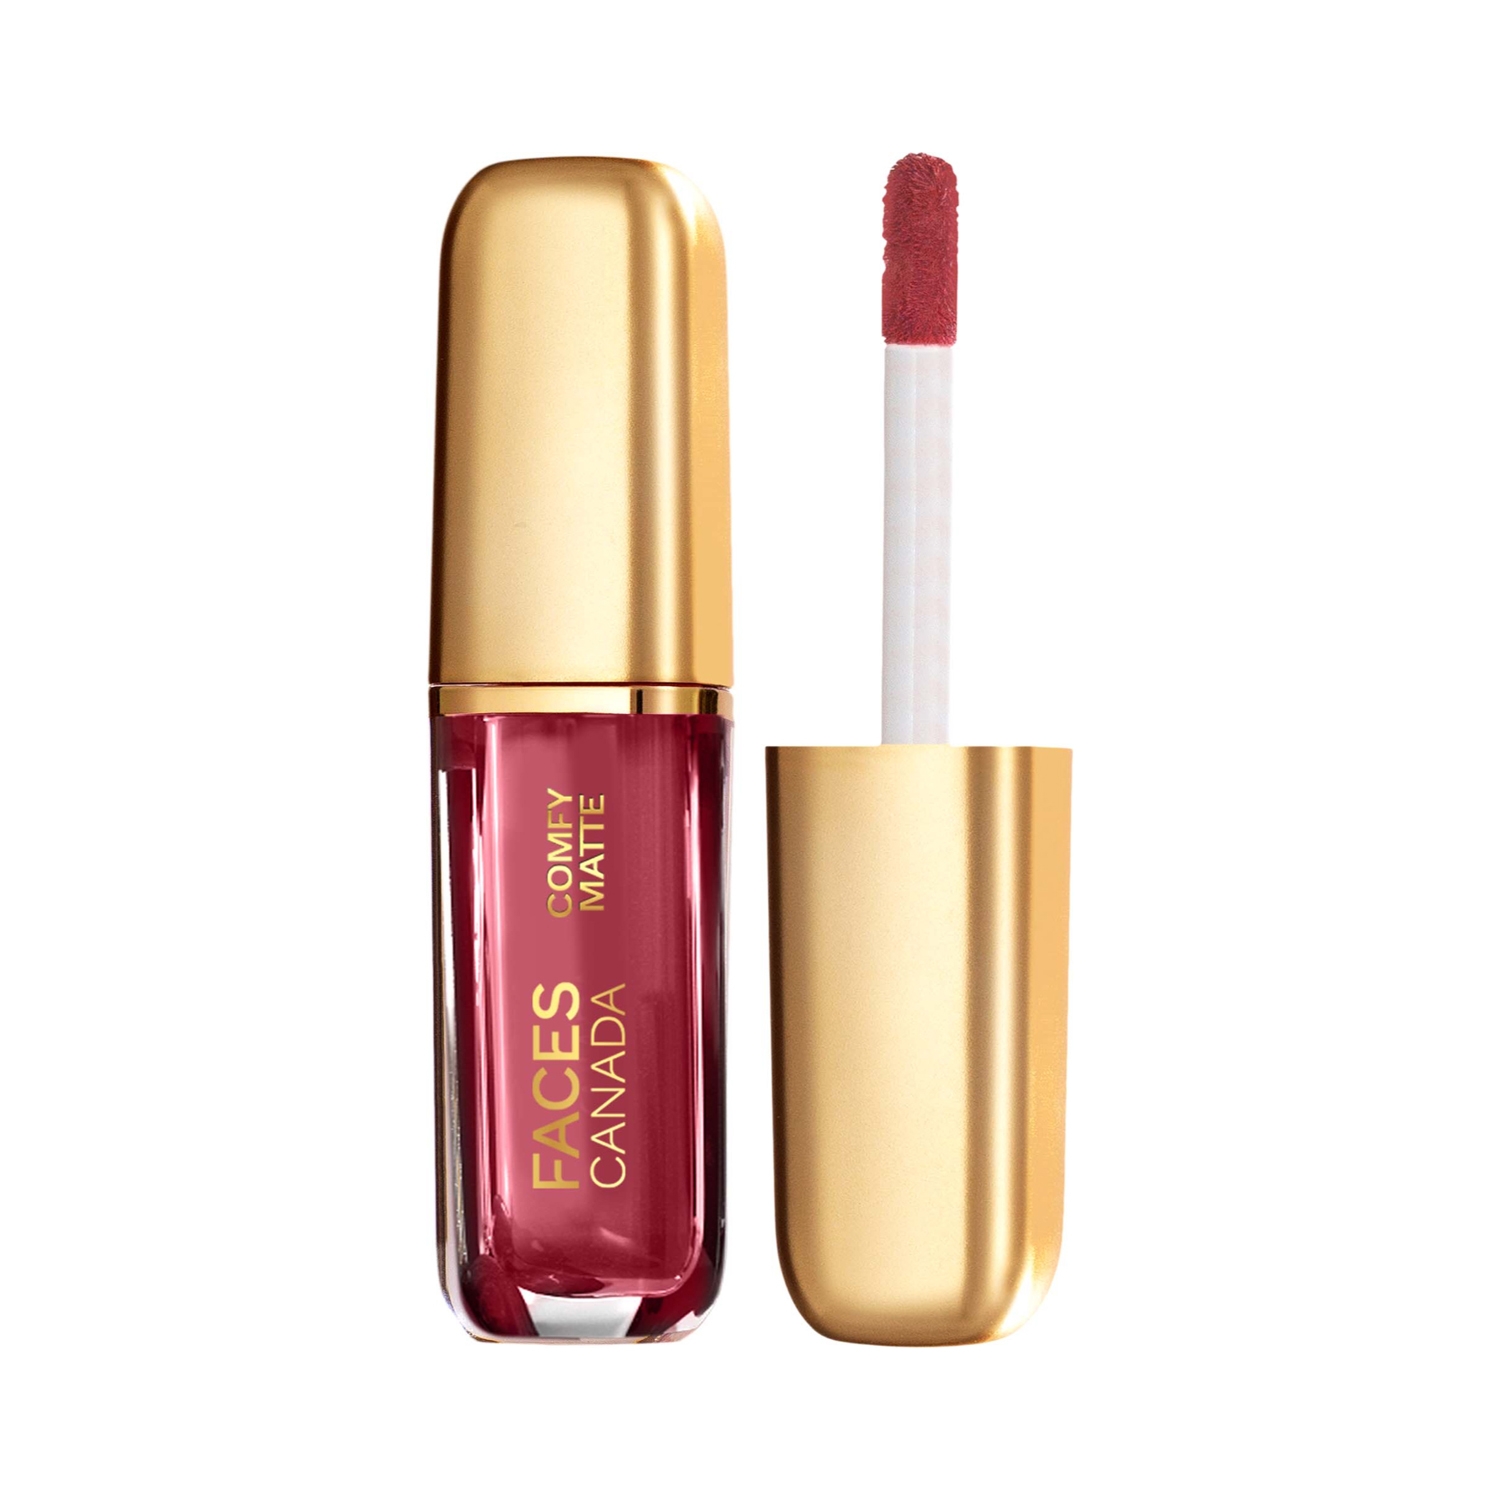 Faces Canada | Faces Canada Comfy Matte Lip Color - 11 Fixed It For You (1.2ml)